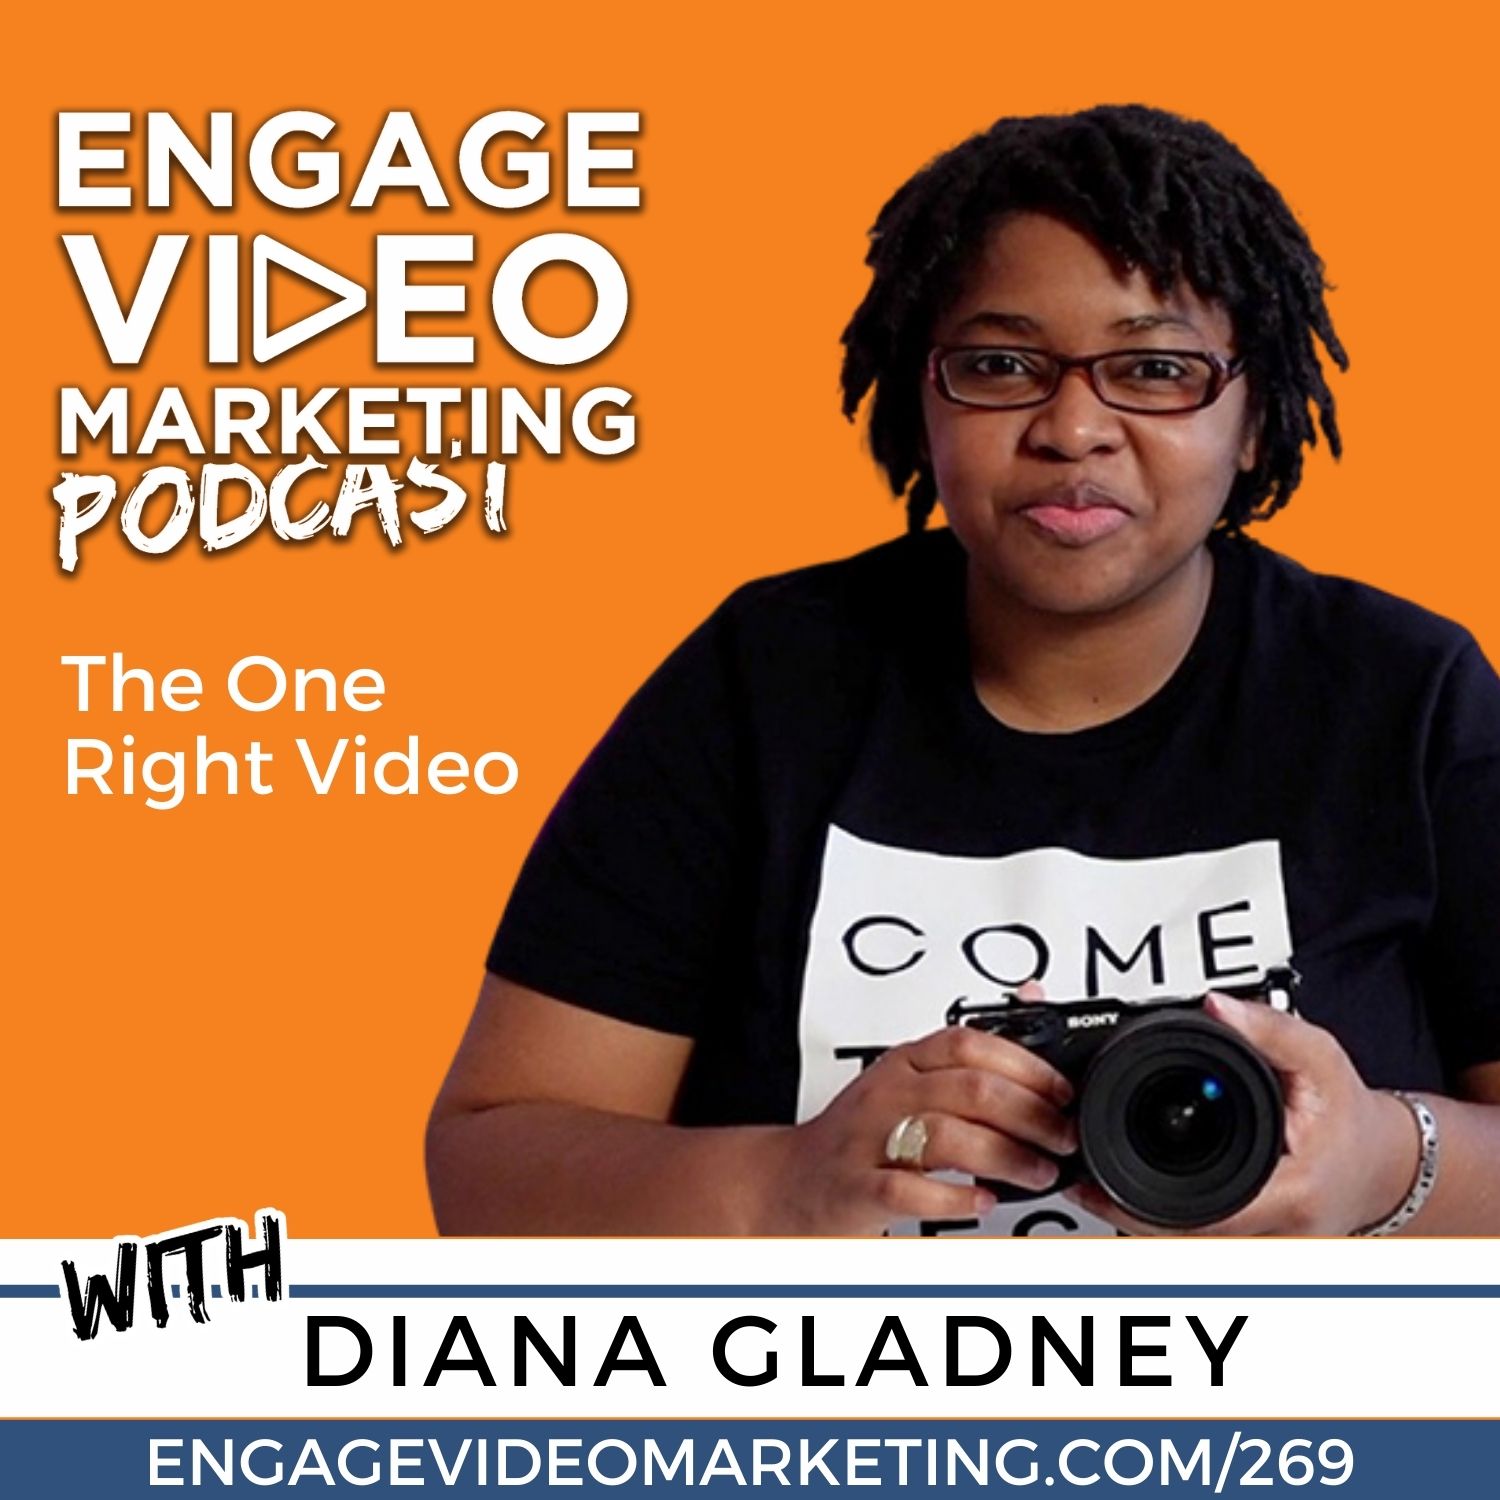 The One Right Video with Diana Gladney